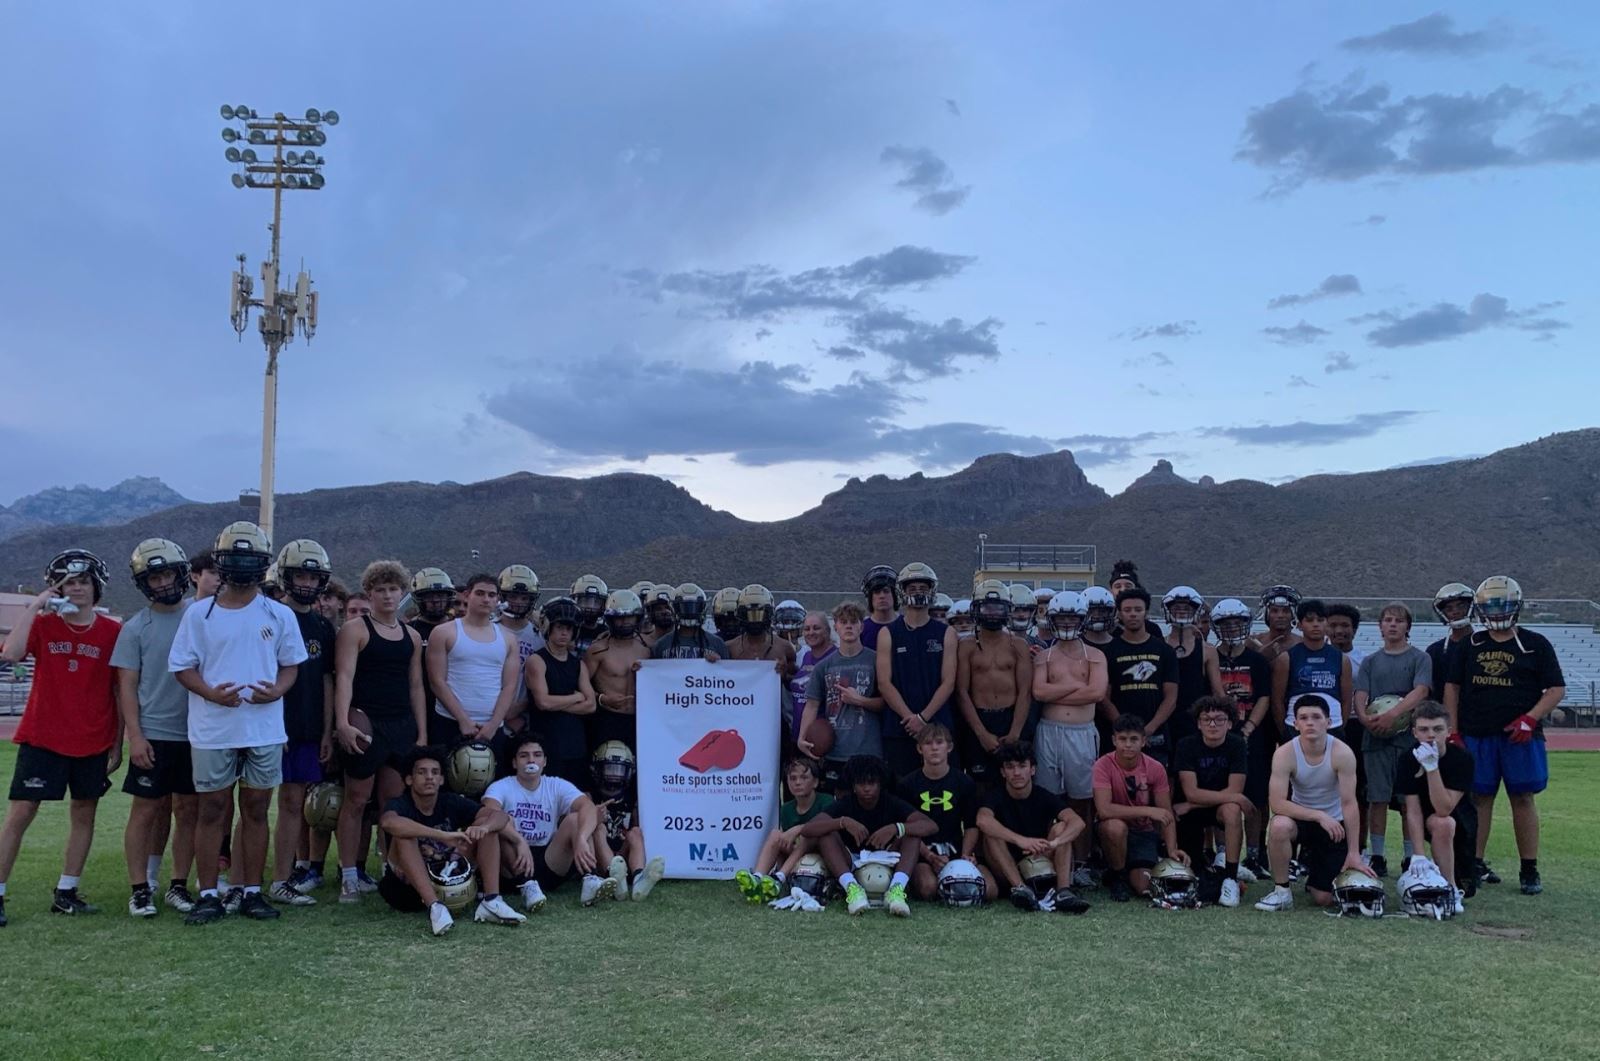 The Sabino High School football team holds up the school's Safe Sports School Award banner on the football field.